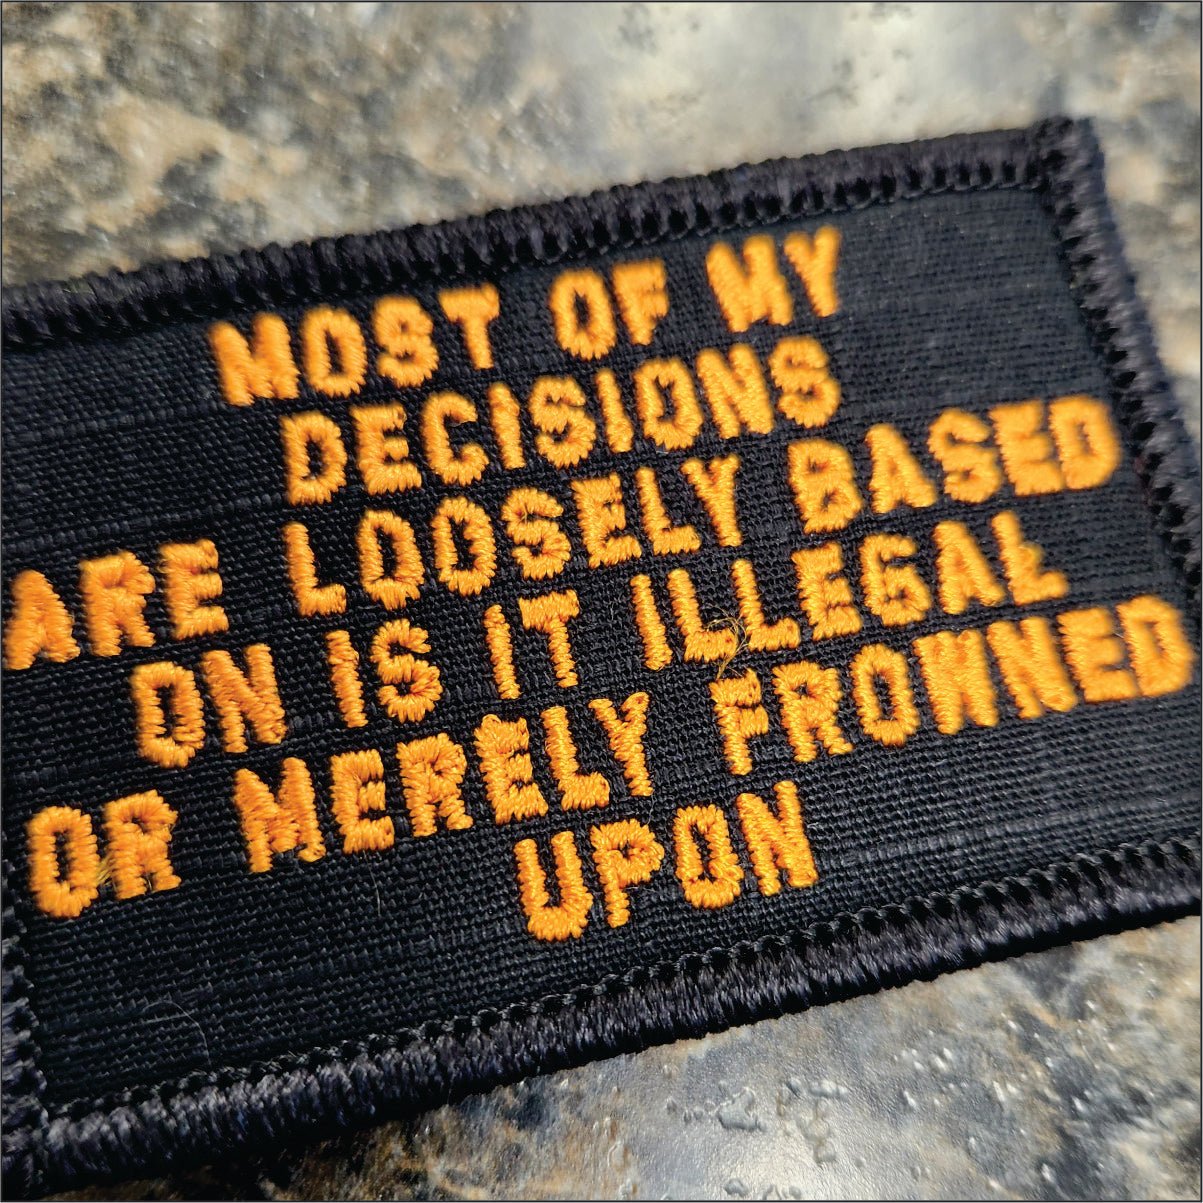 As Seen on Socials - Most of My Decisions - 2x3 Patch - Black w/Orange